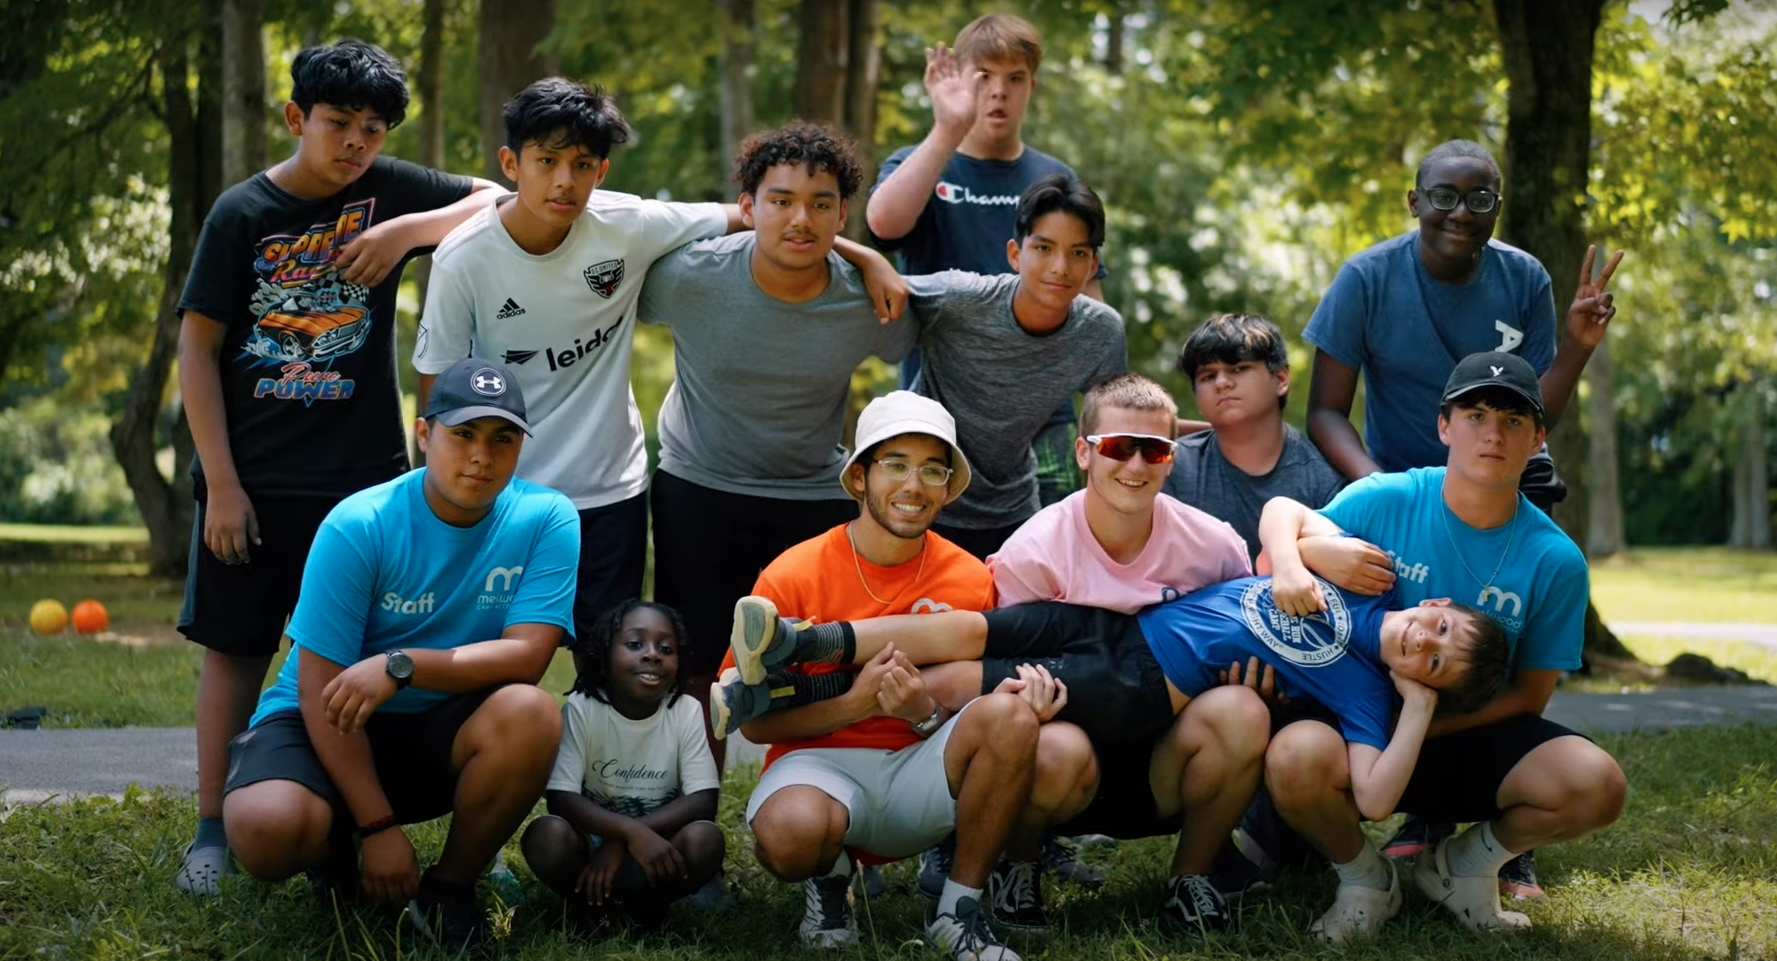 Campers at Camp Accomplish smiling for the camera after a good day at camp.